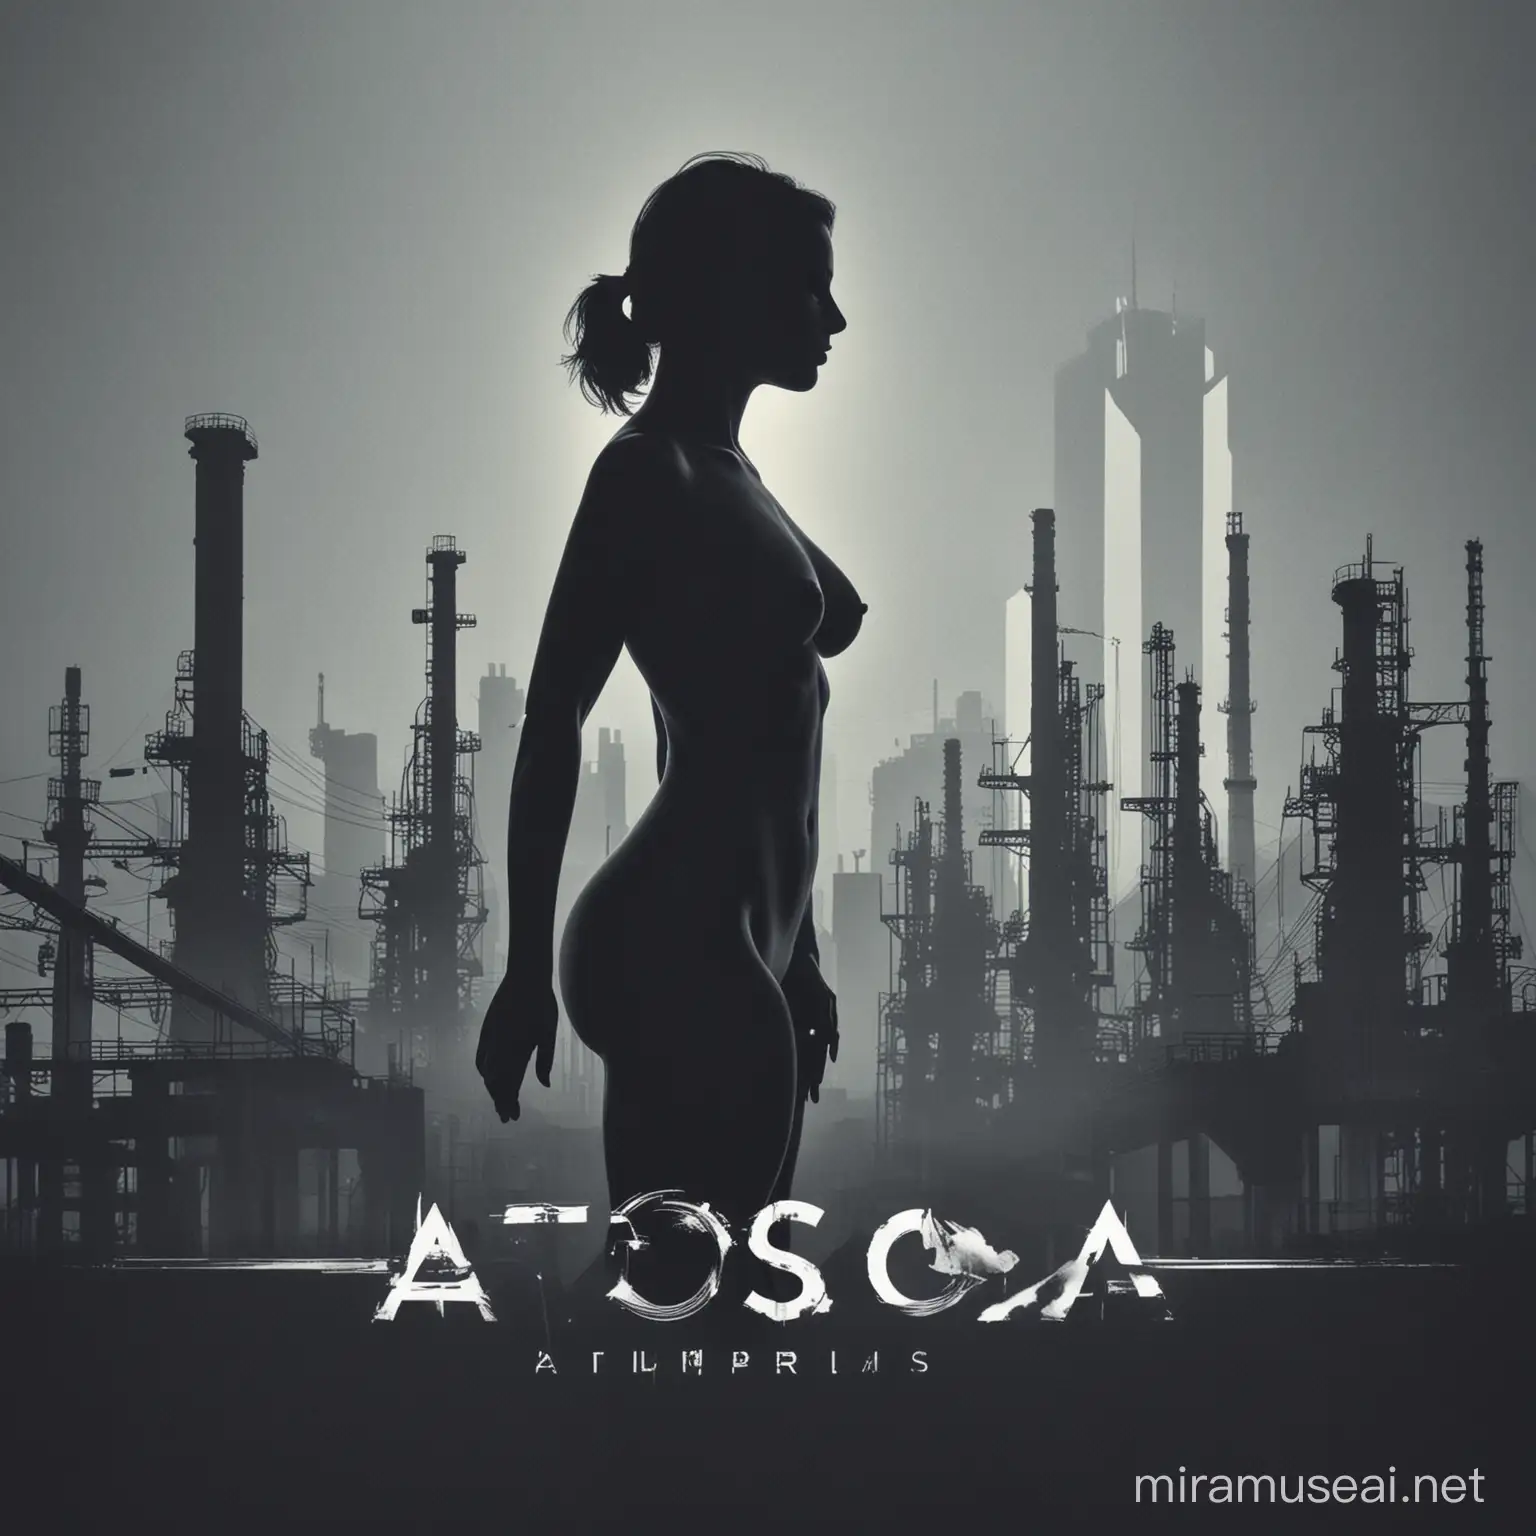 We really like the woman's body silhouette and the critical infrastructure in the background. We would prefer it to be more traditional looking looking logo with the text Atossa Group